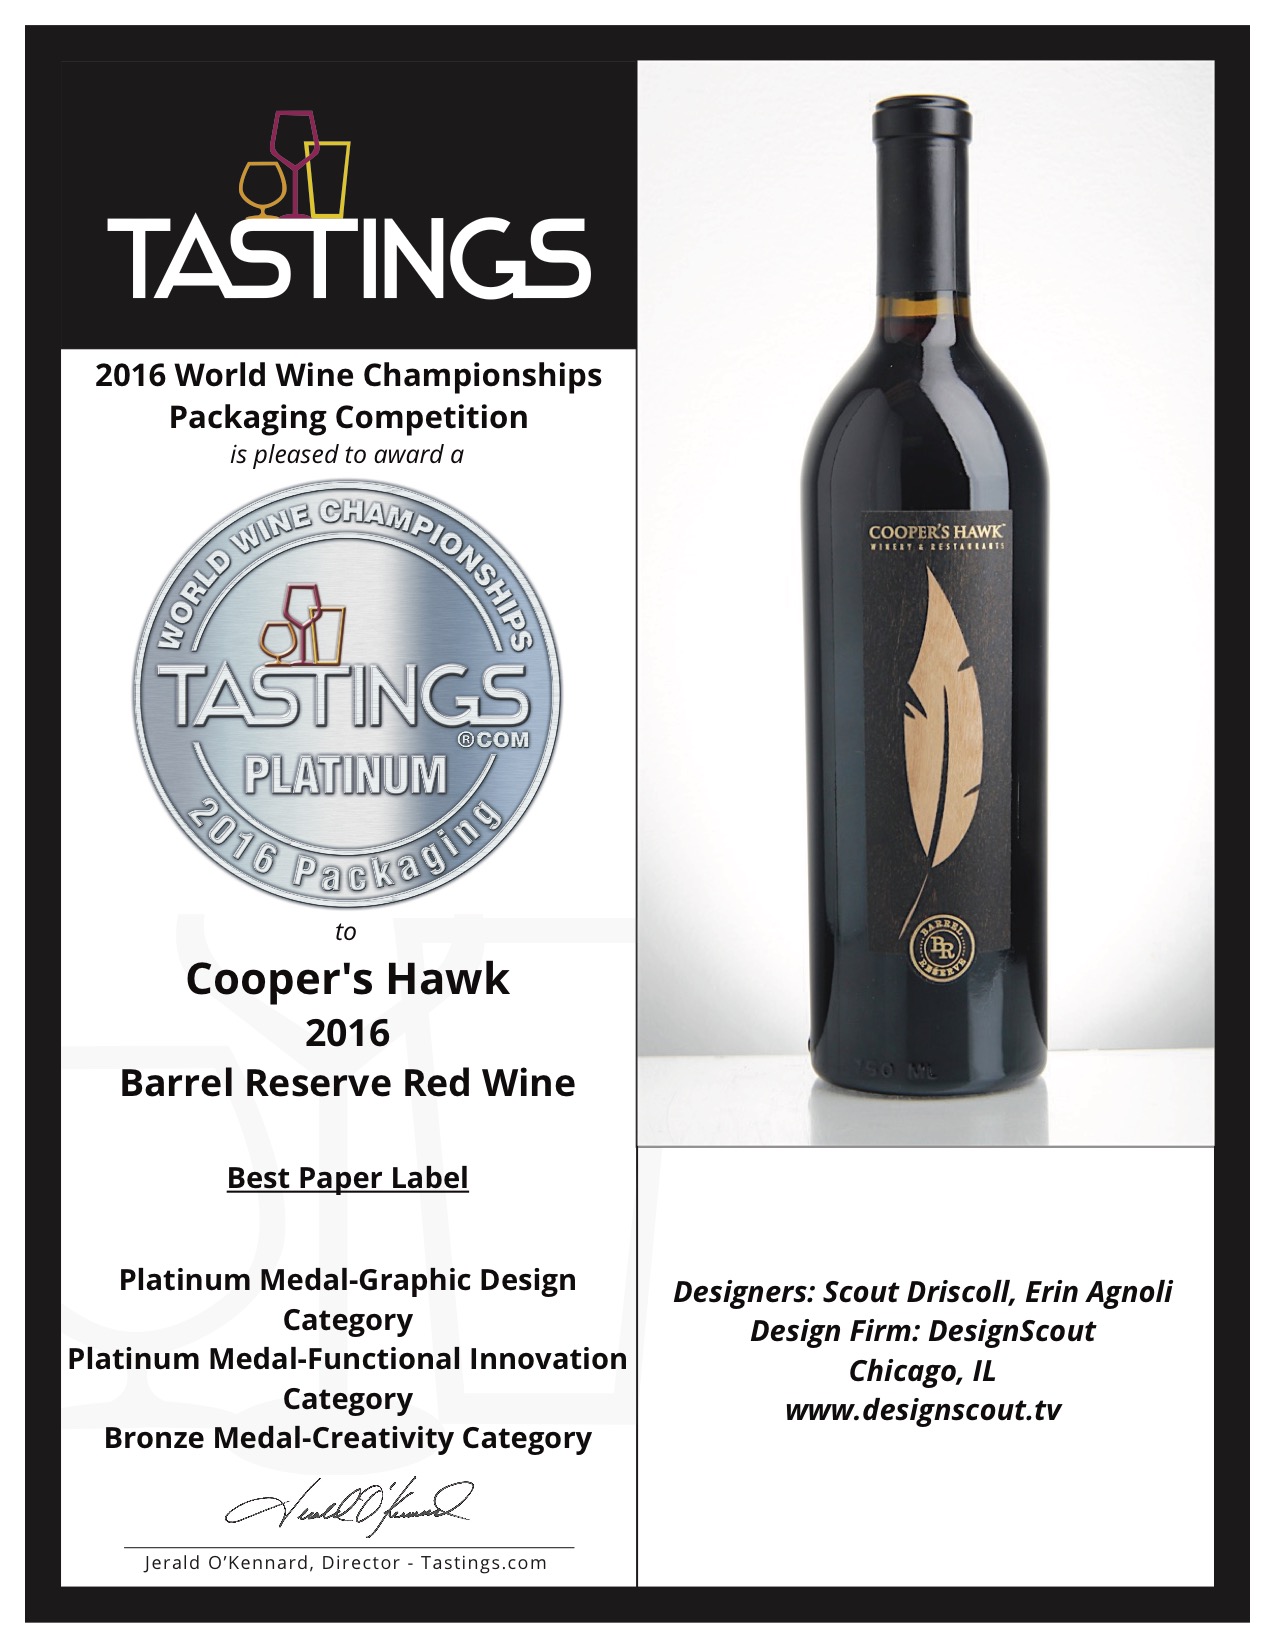 Cooper's Hawk 2016 Barrel Reserve Red Wine designed by DesignScout recieved "Best Paper Label" in Tastings.com 2016 World Wine Championships Packaging Competition